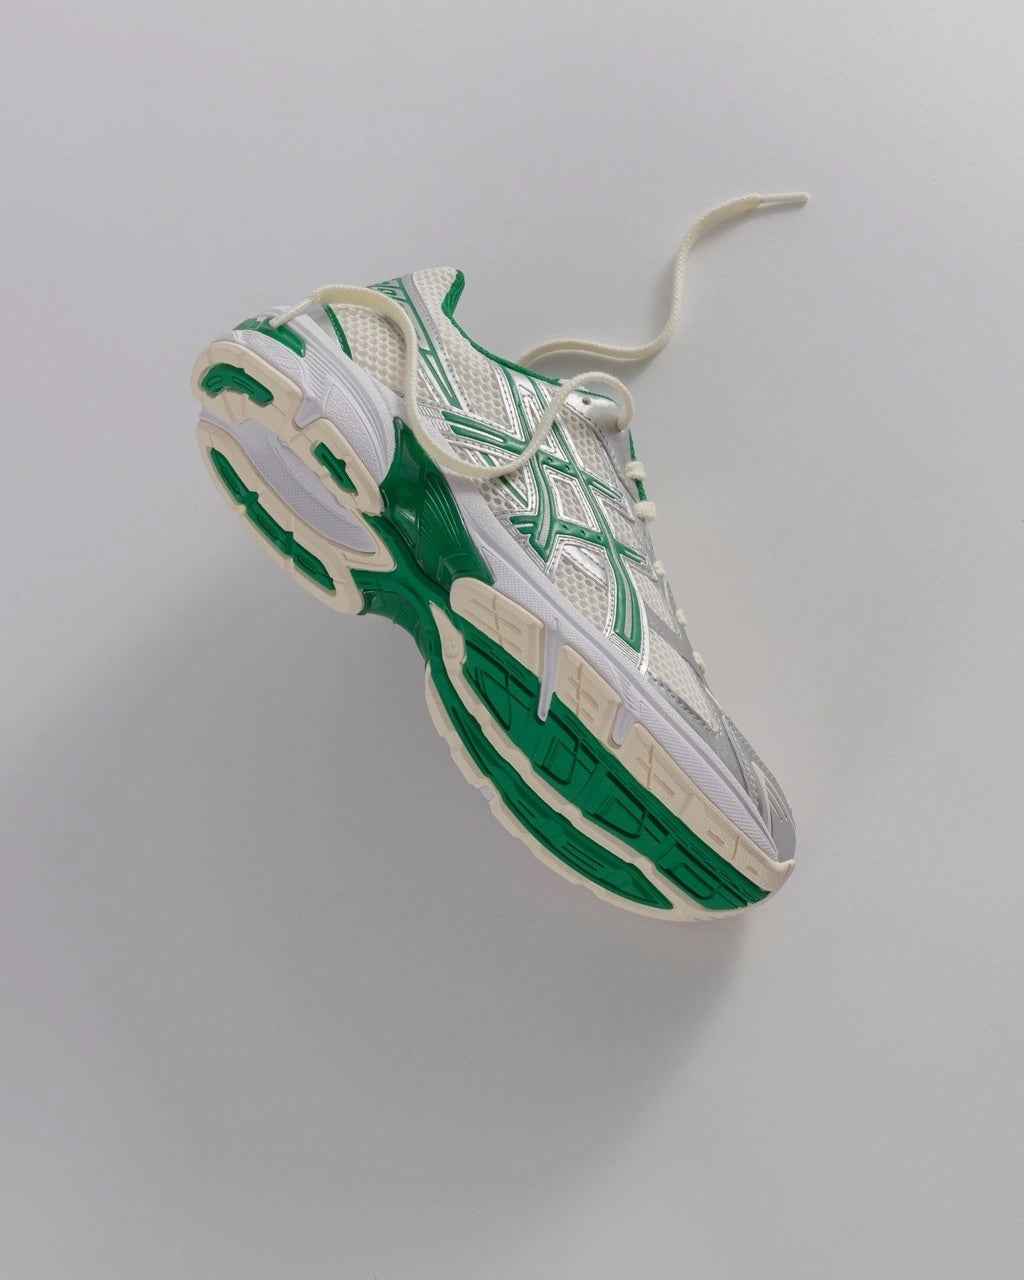 Studio image of the ASICS GEL-1130 Kale back in Cream/Kale suspended in the air